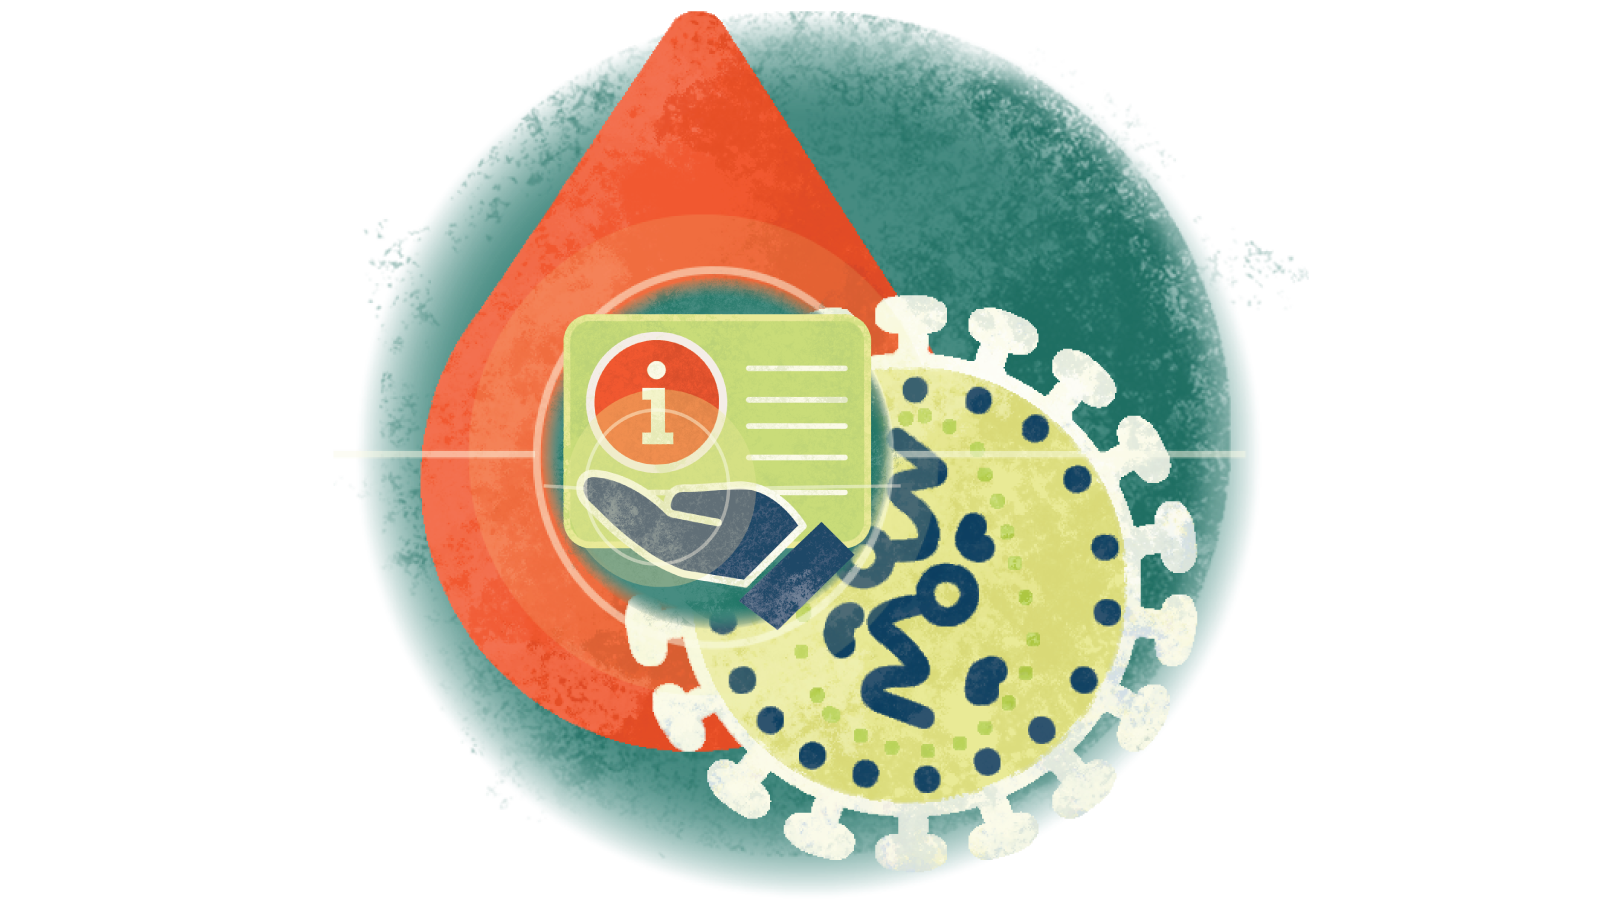 Illustration of the letter i over a hand over a blood droplet with HIV